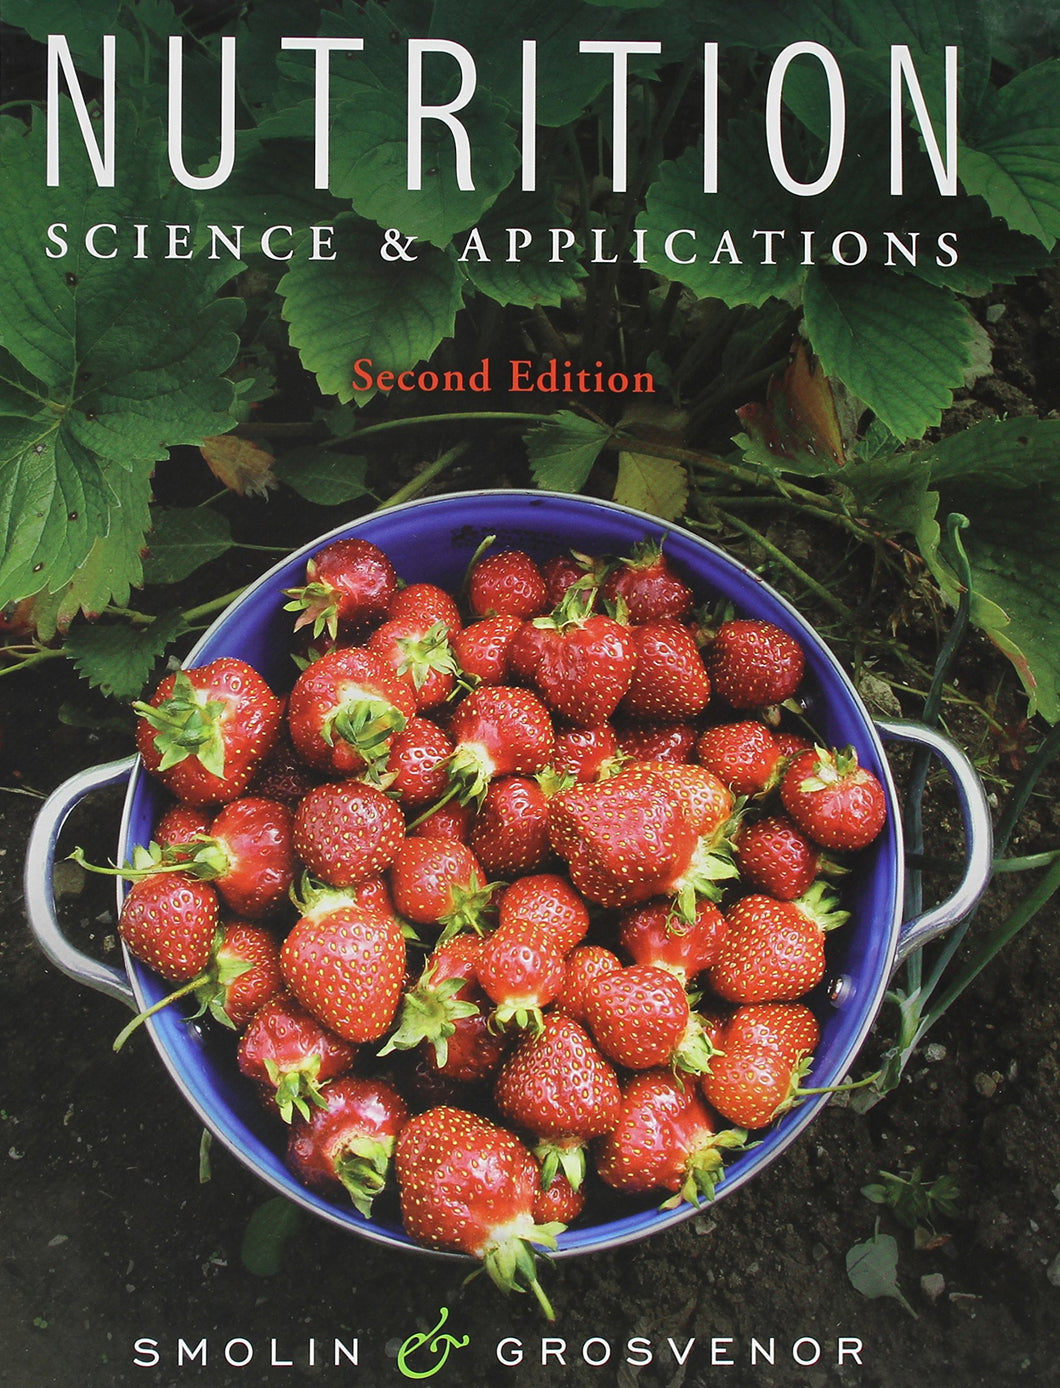 Nutrition: Science and Applications [Hardcover] 2e by Lori A. Smolin